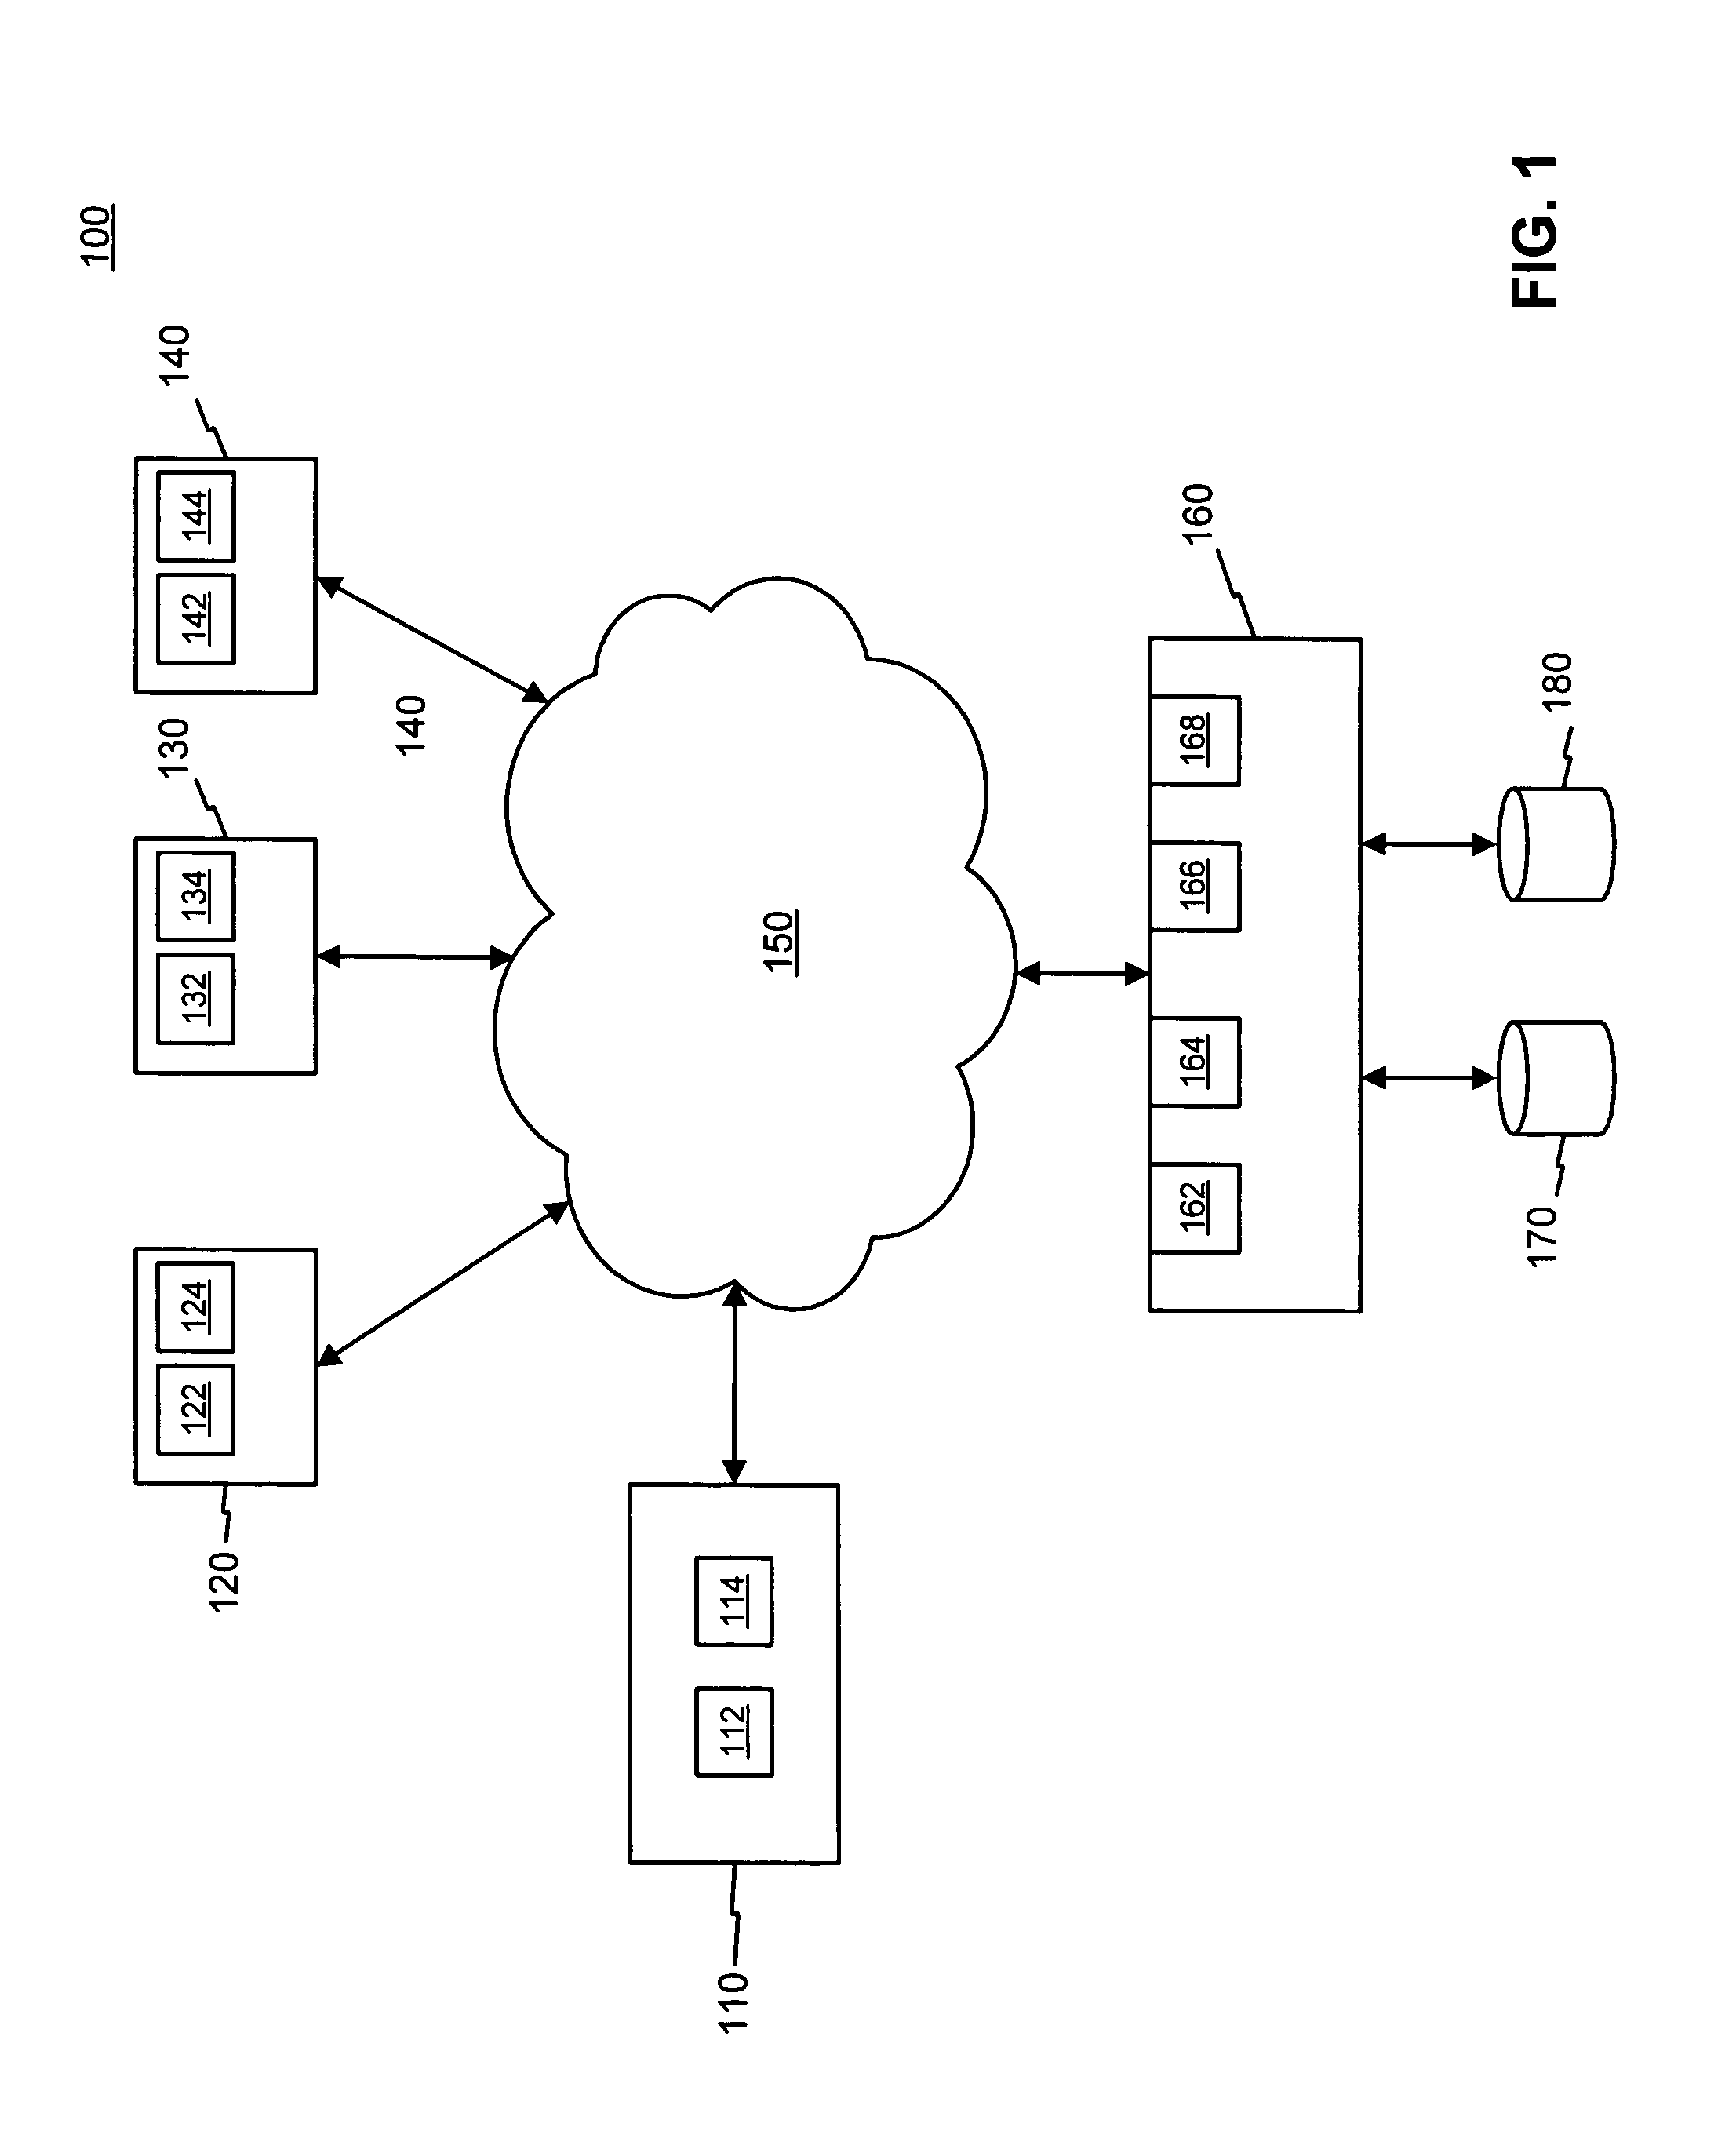 Systems and methods for disabling an array port for an enterprise